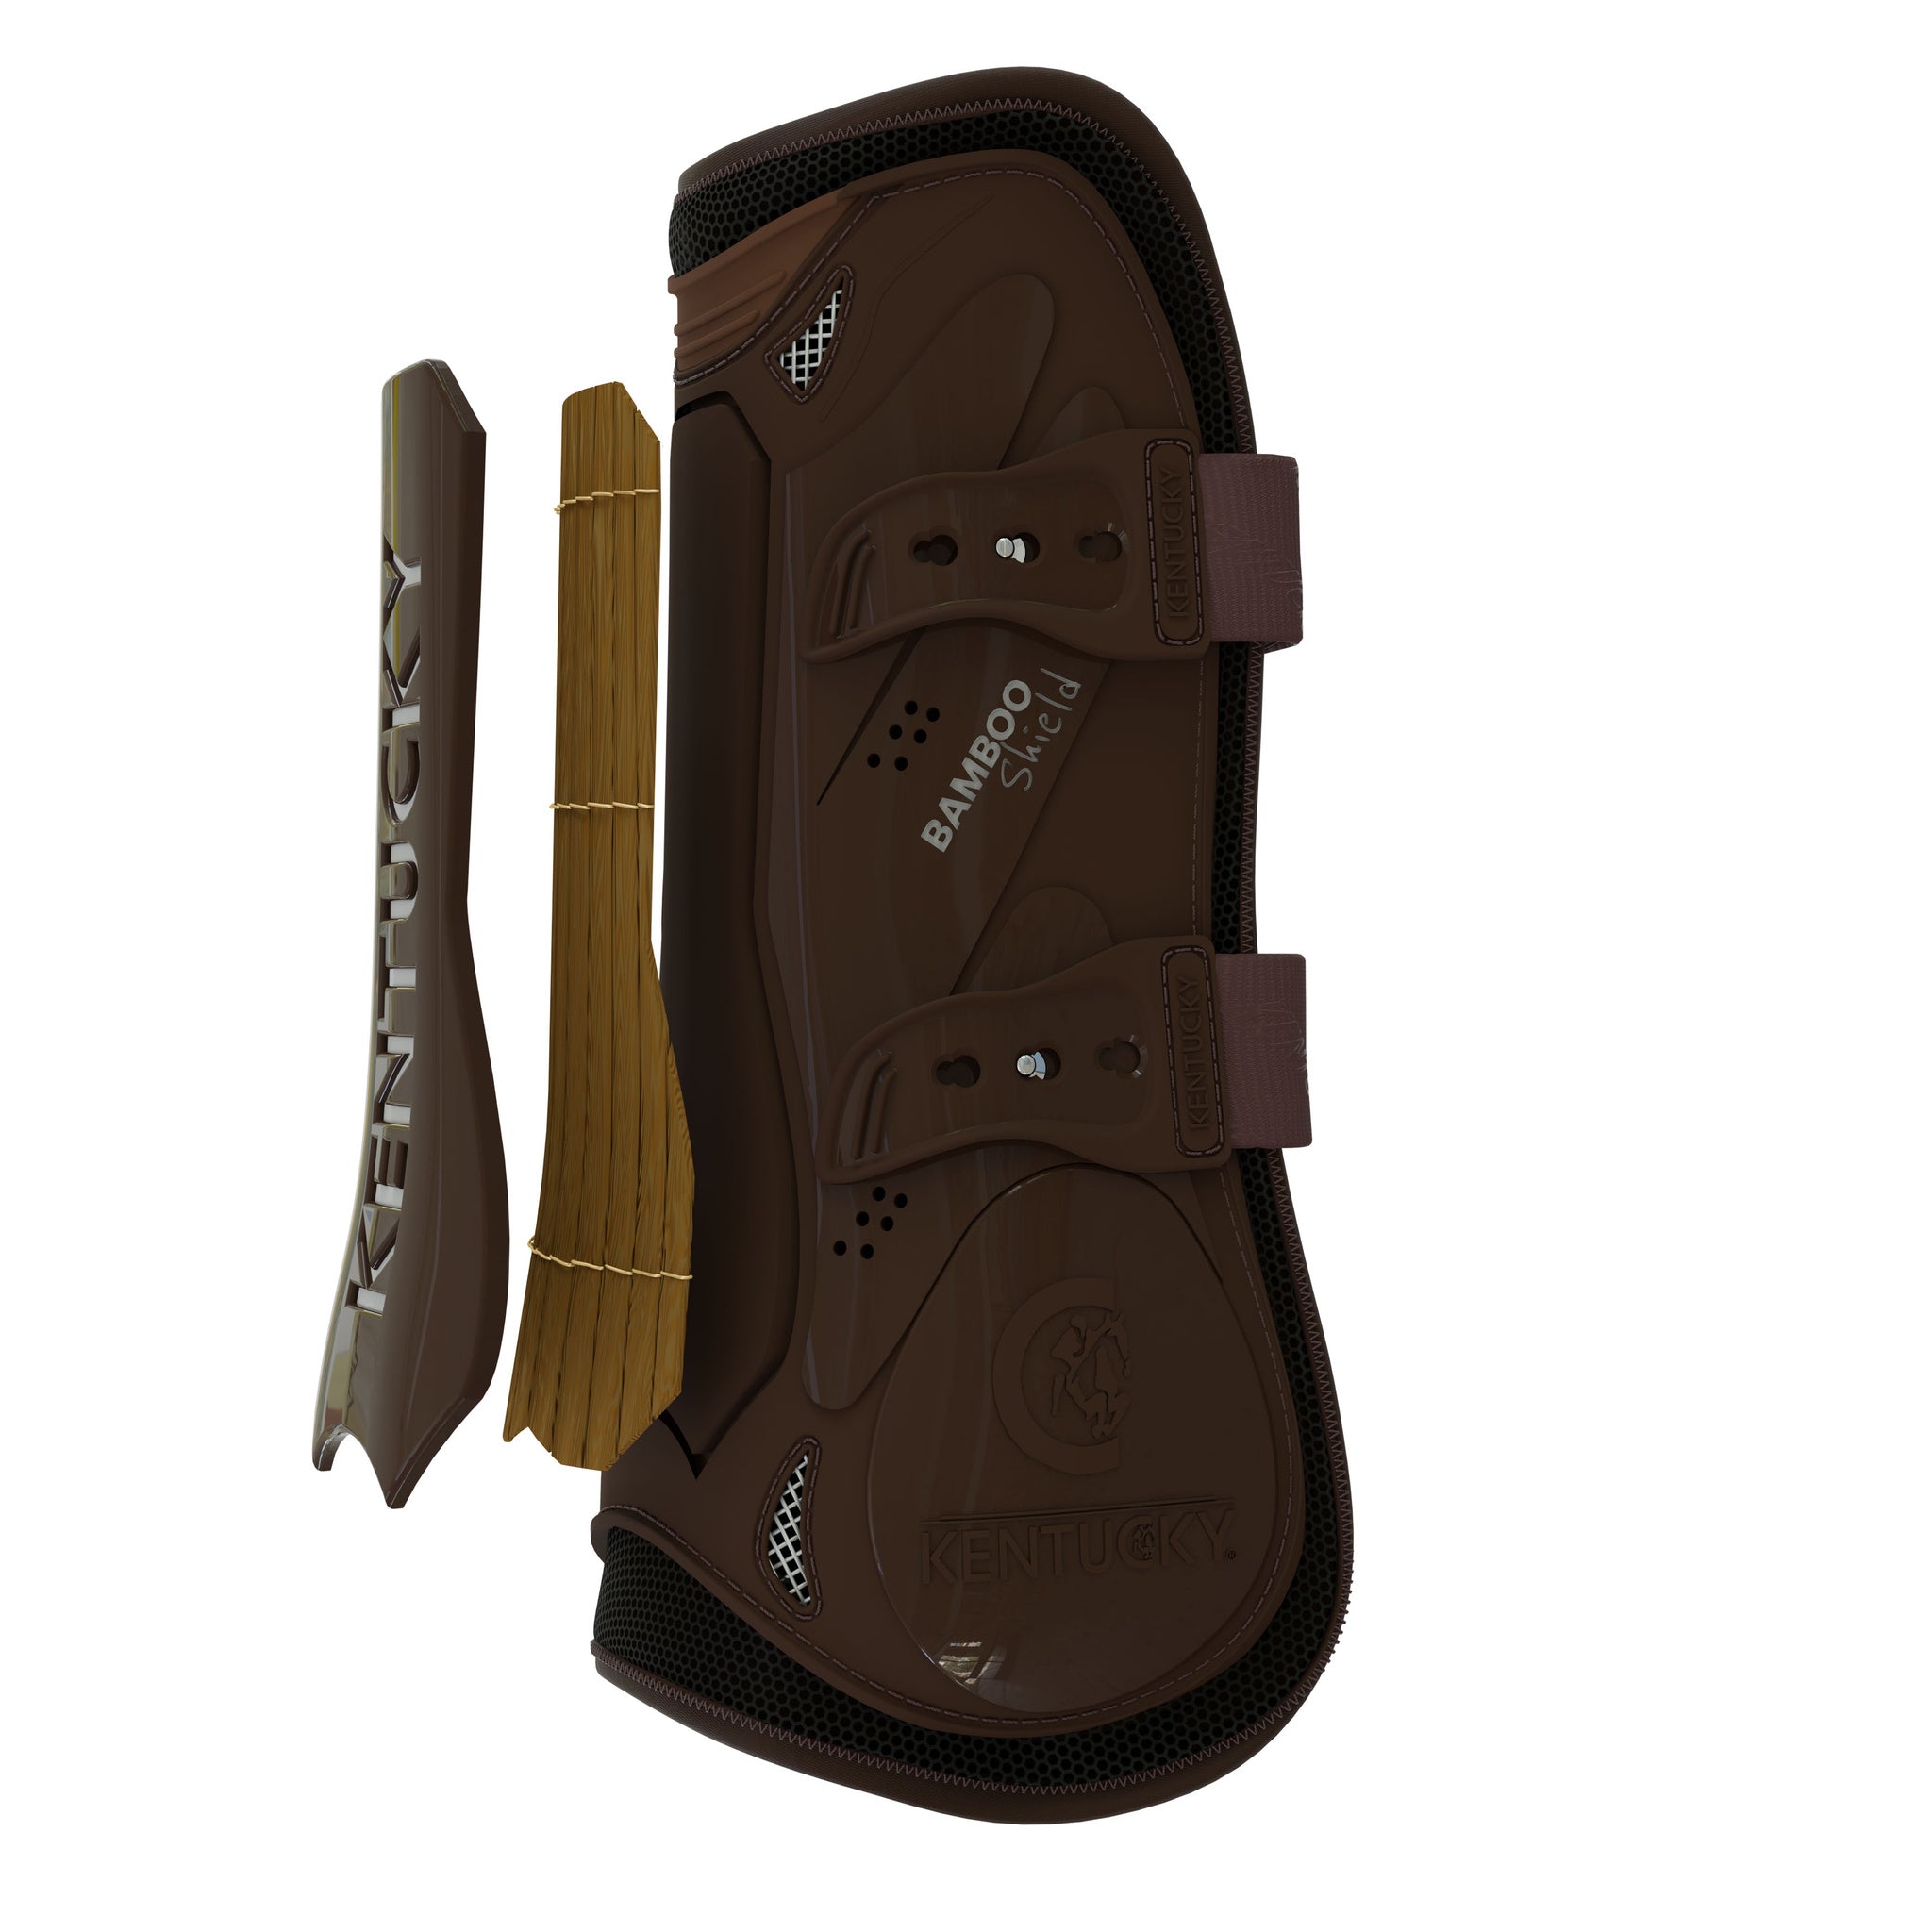 Kentucky Vegan Sheepskin Tendon Boots Bamboo Shield with Elastic fastenings are now available following years of research and development. The Kentucky Bamboo Sheild Supersedes the already very popular Kentucky Sheepskin Tendon Boot.  The new advanced Technology Bamboo Shield provides the ultimate protection to the tendon area, if your horse should over reach higher up the leg.